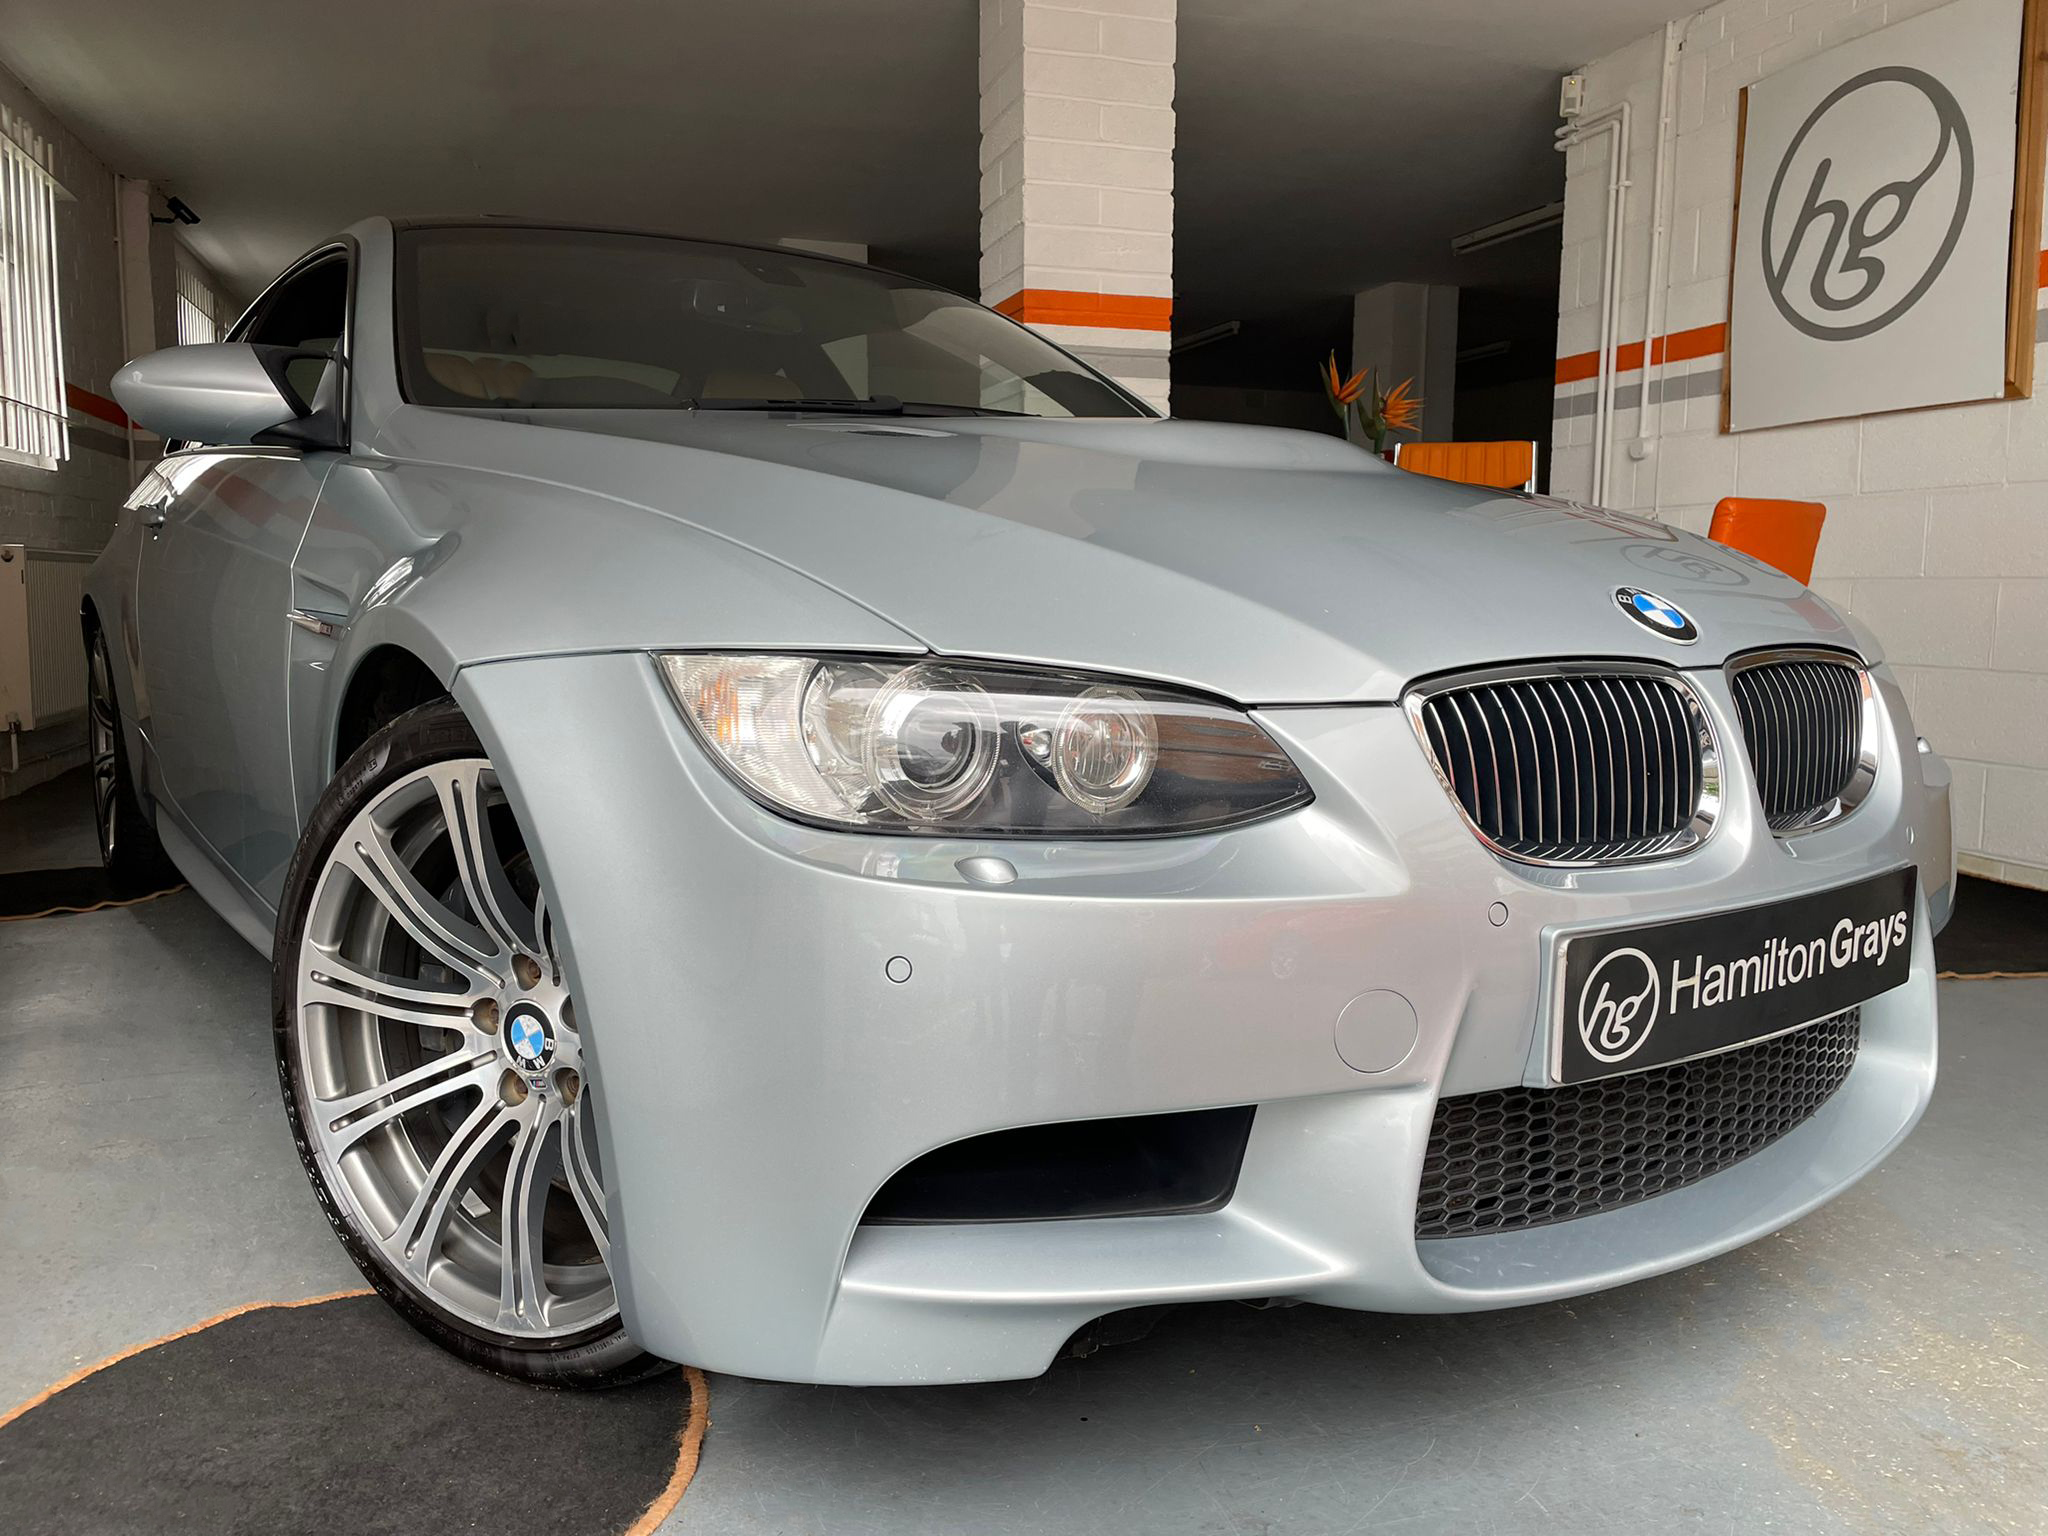 2007 (57) BMW M3 4.0i V8 Manual. In Silverstone II with Extended Novillo Beige Leather. 89,701m.. Motorway Miles. FSH. Engine Exchange by BMW at 80k..  £17,950